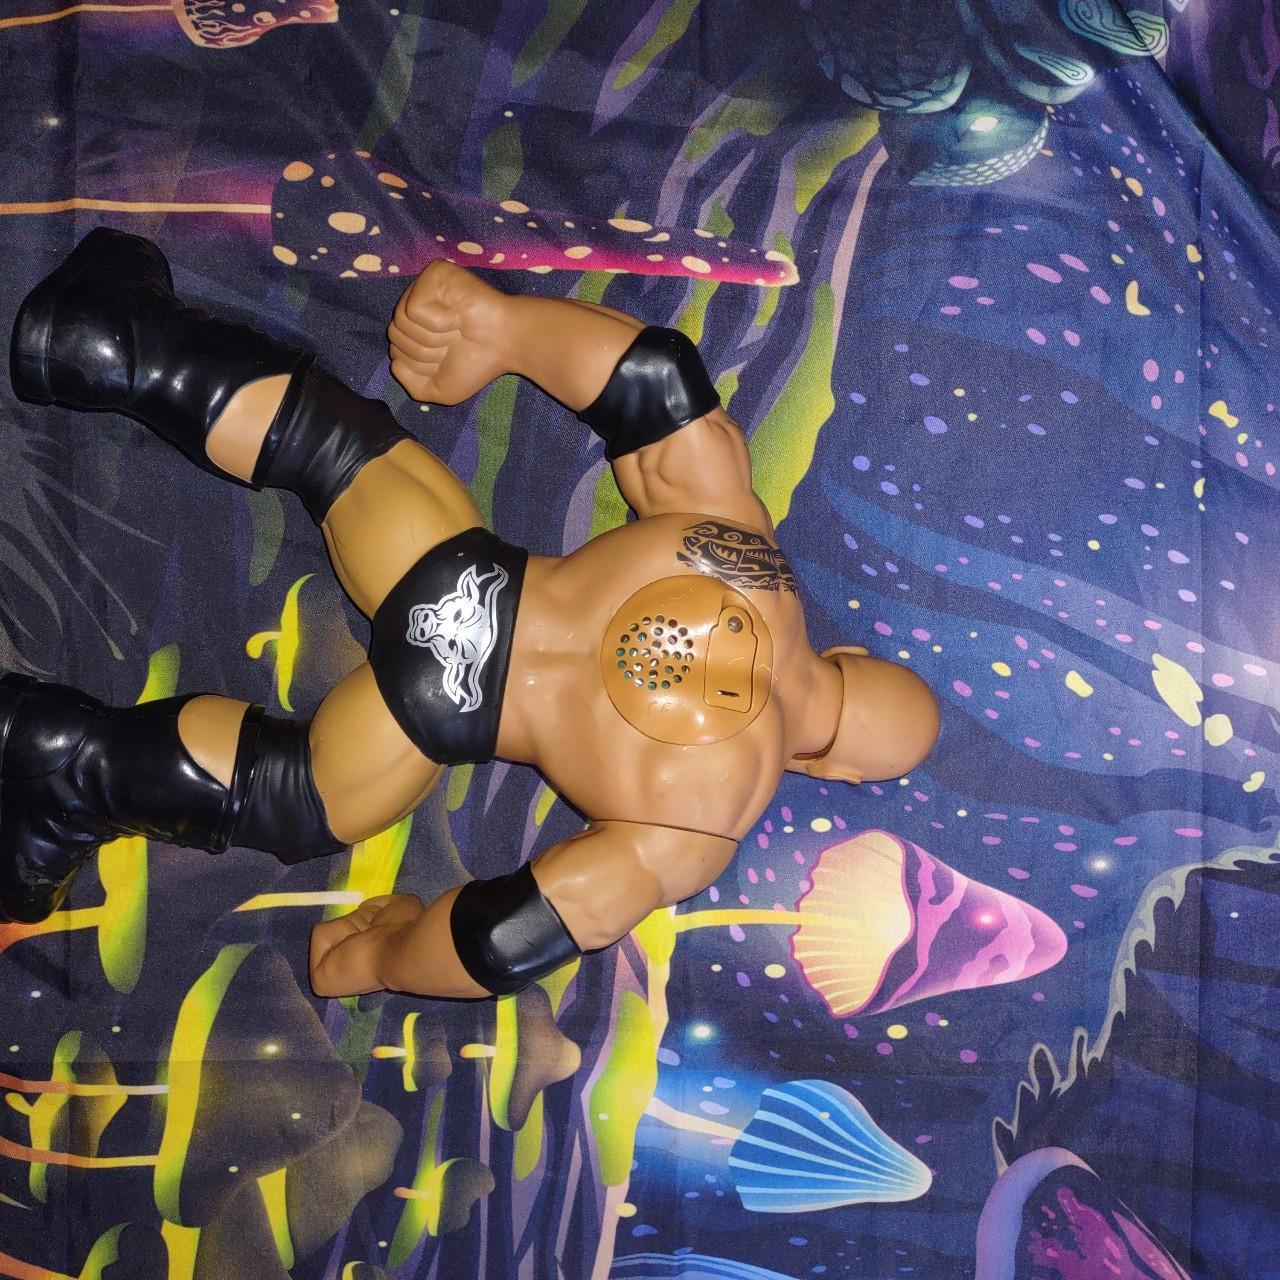 Product Image 2 - The Rock Figure

WWE's Dwayne "The